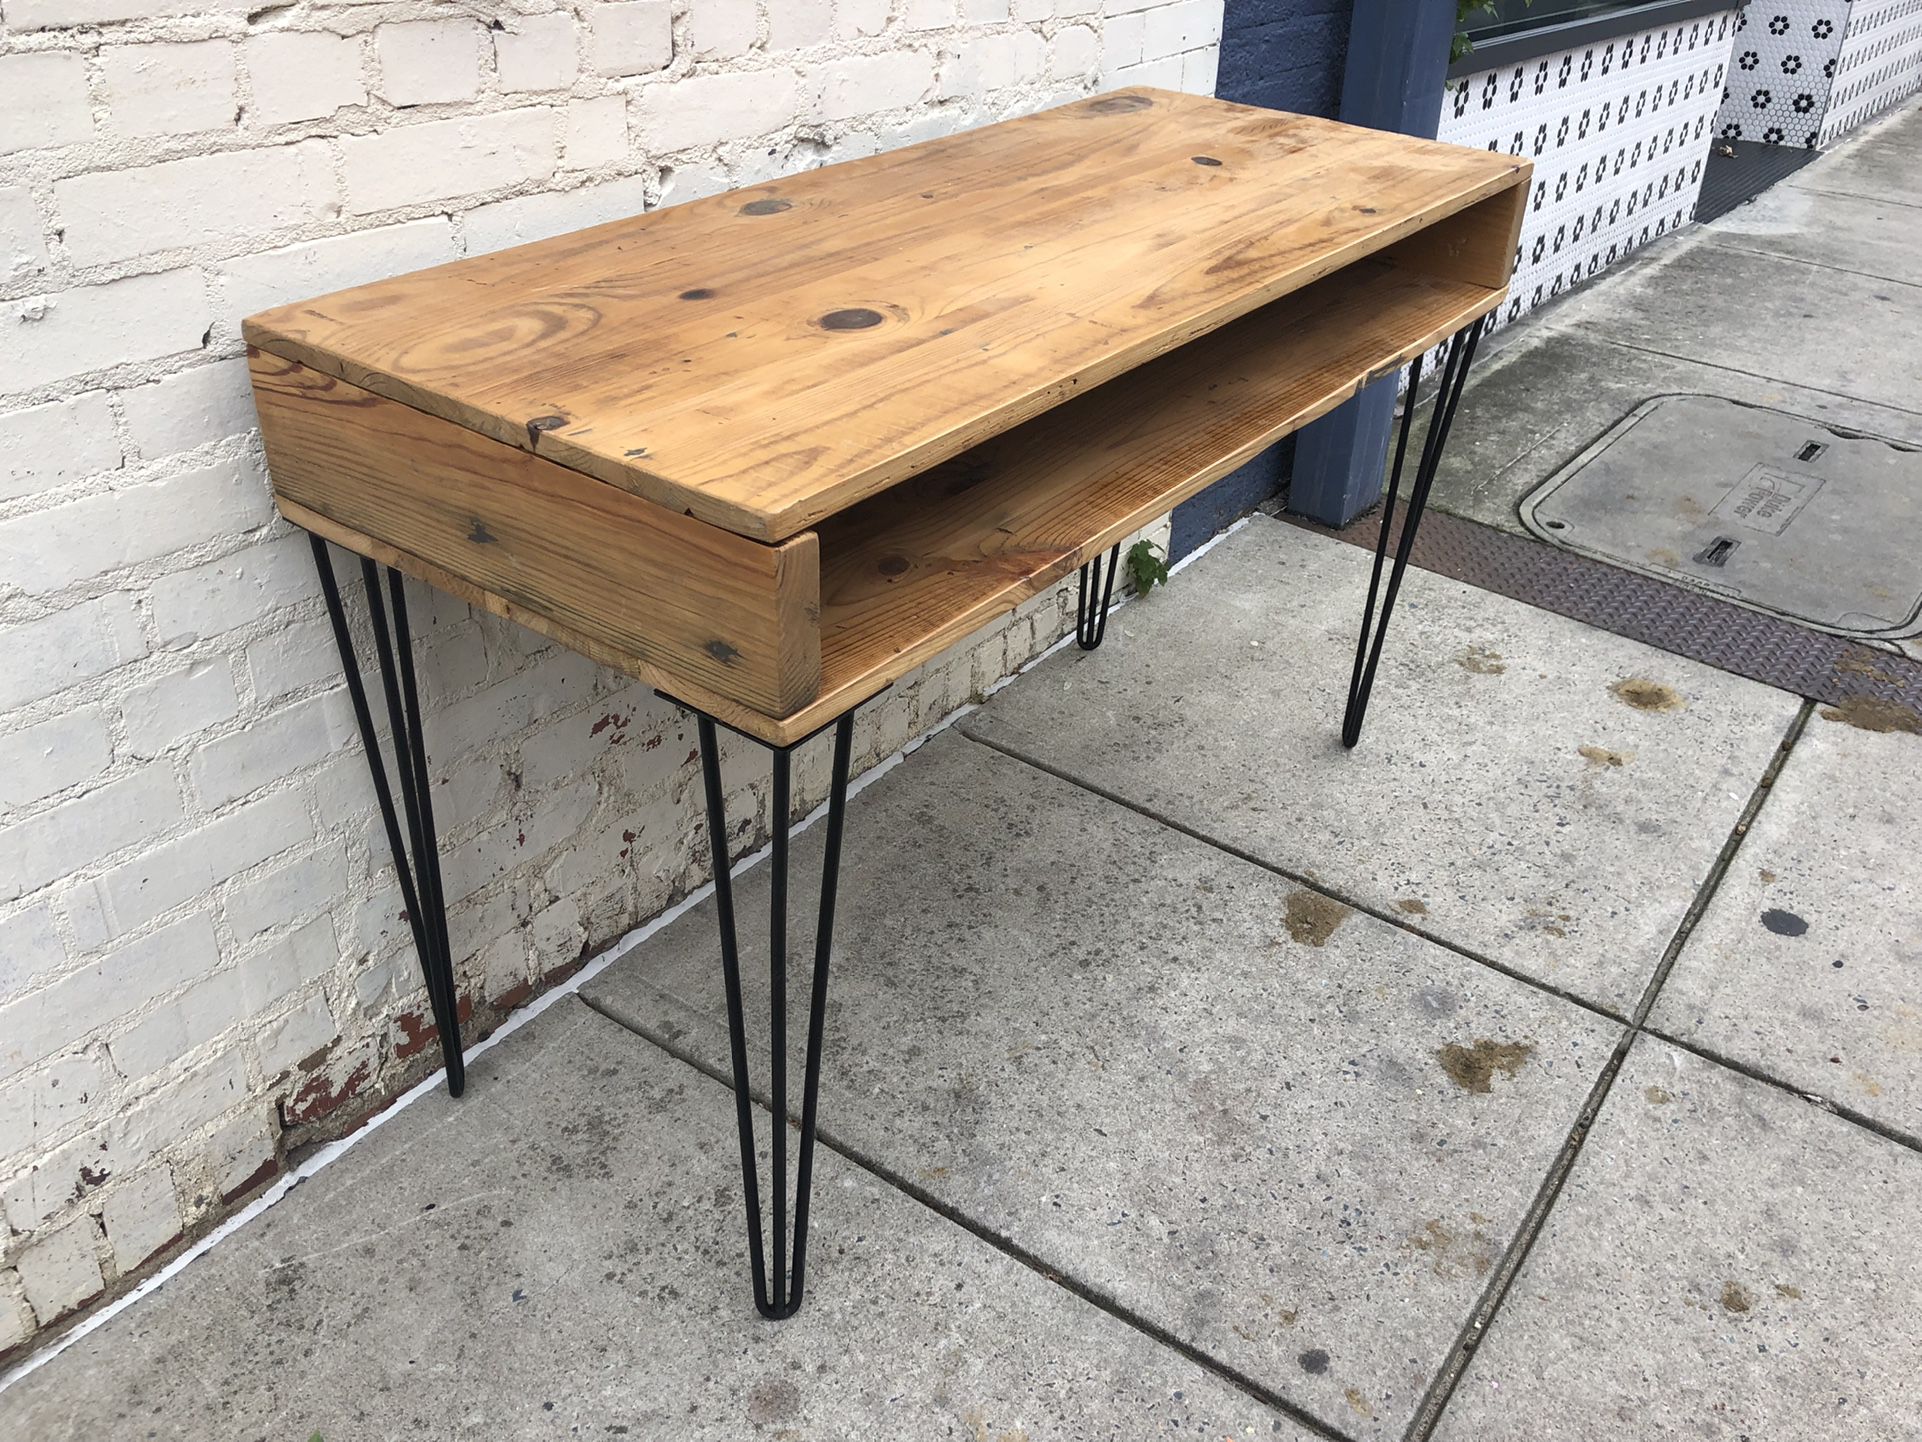 Small desk made from reclaimed wood